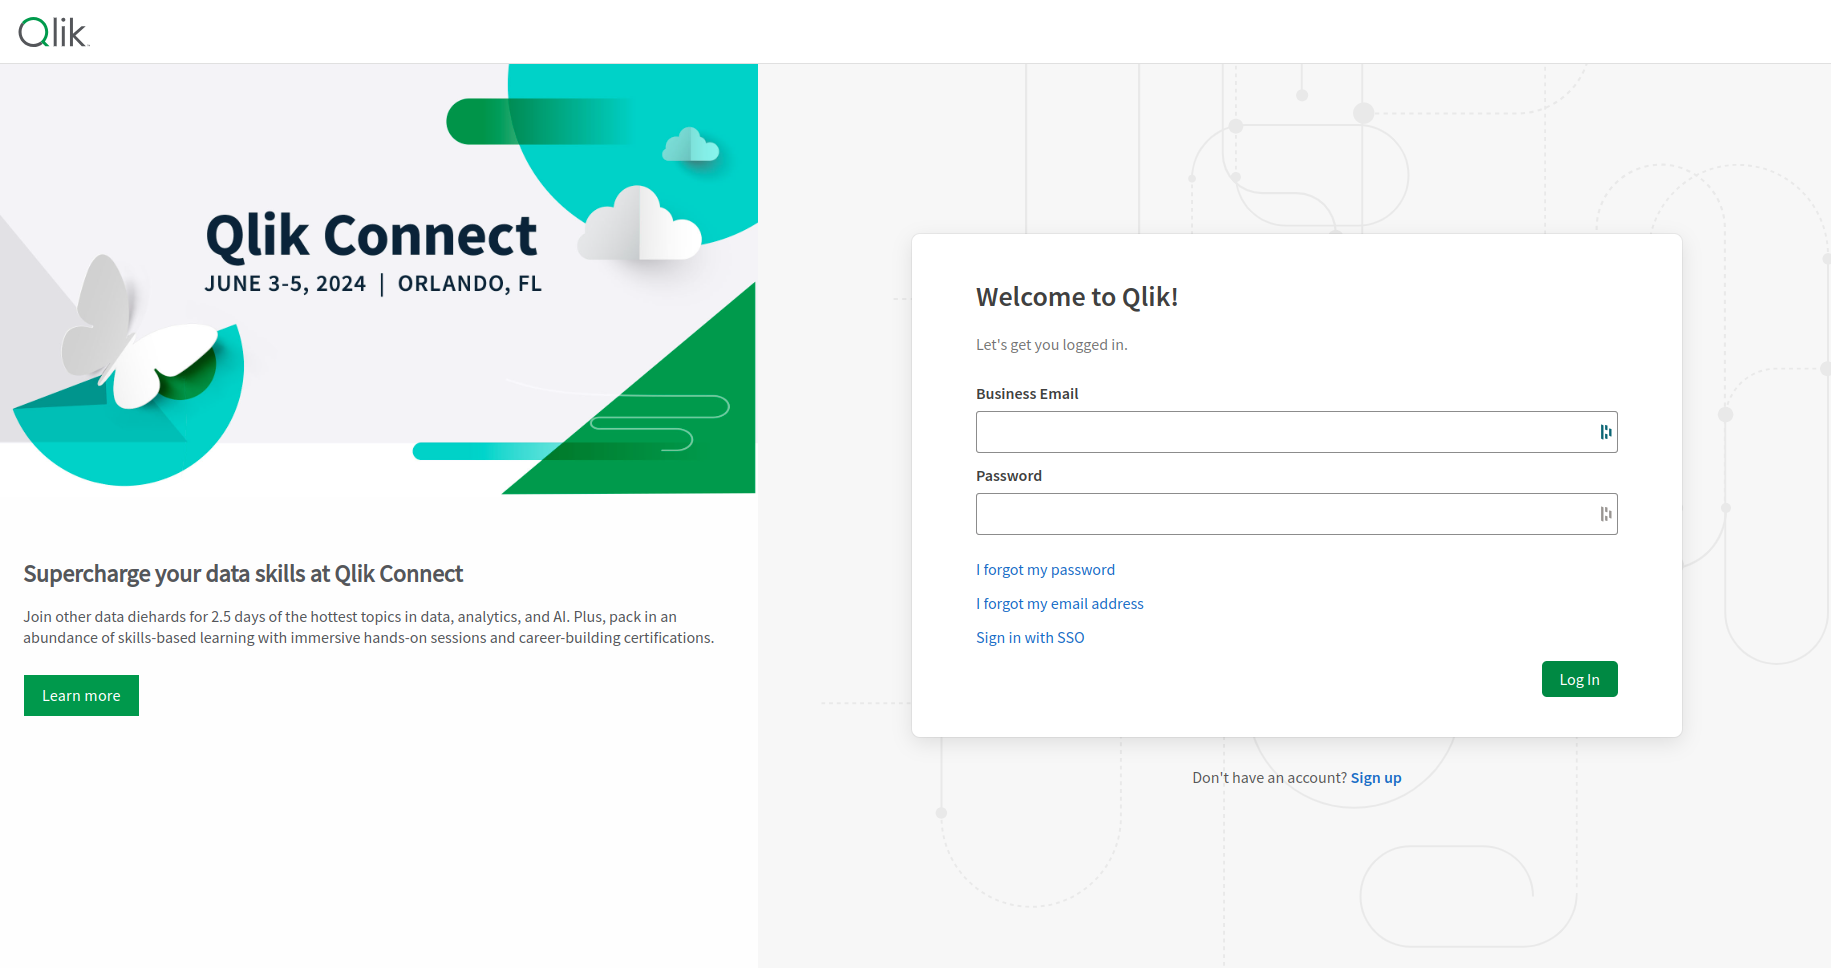 This is the Qlik login page.